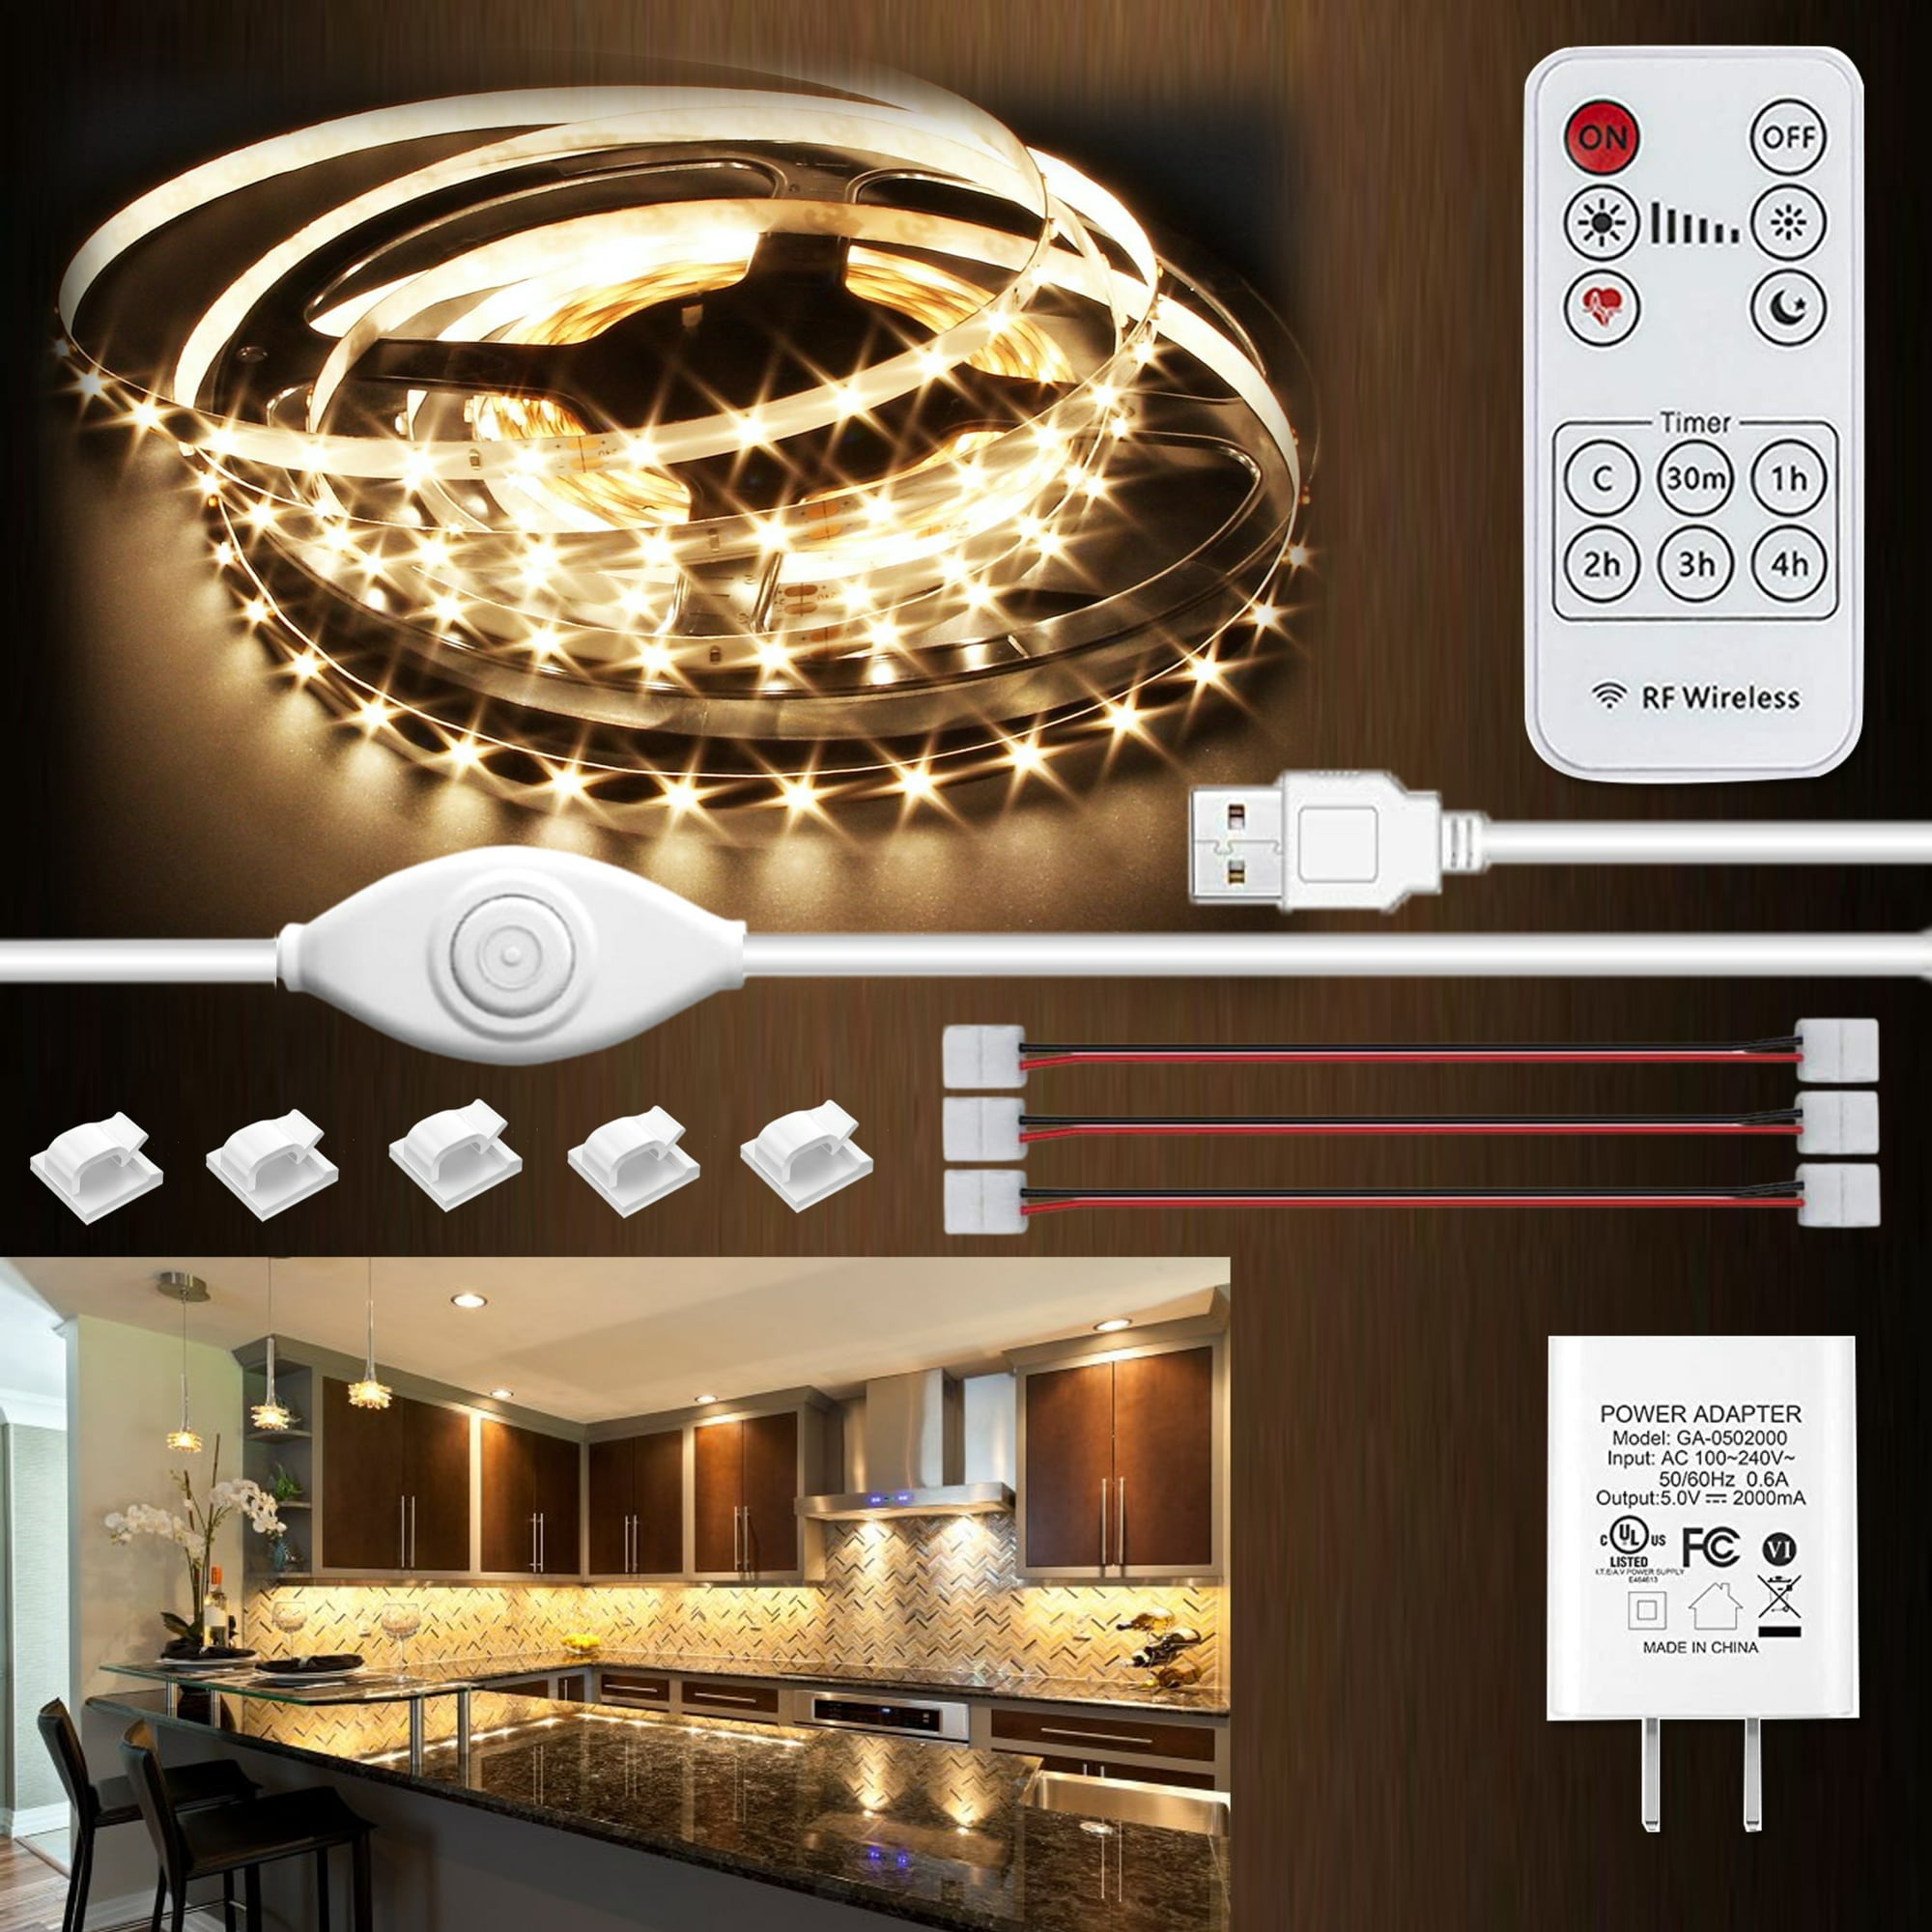 illuminlabs Under Cabinet Lights, LED Strip Lights with Remote Control,  Dimmable for Closet, Shelf, TV Back, Under Counter Lights For Kitchen,  13.2ft, Warm White 